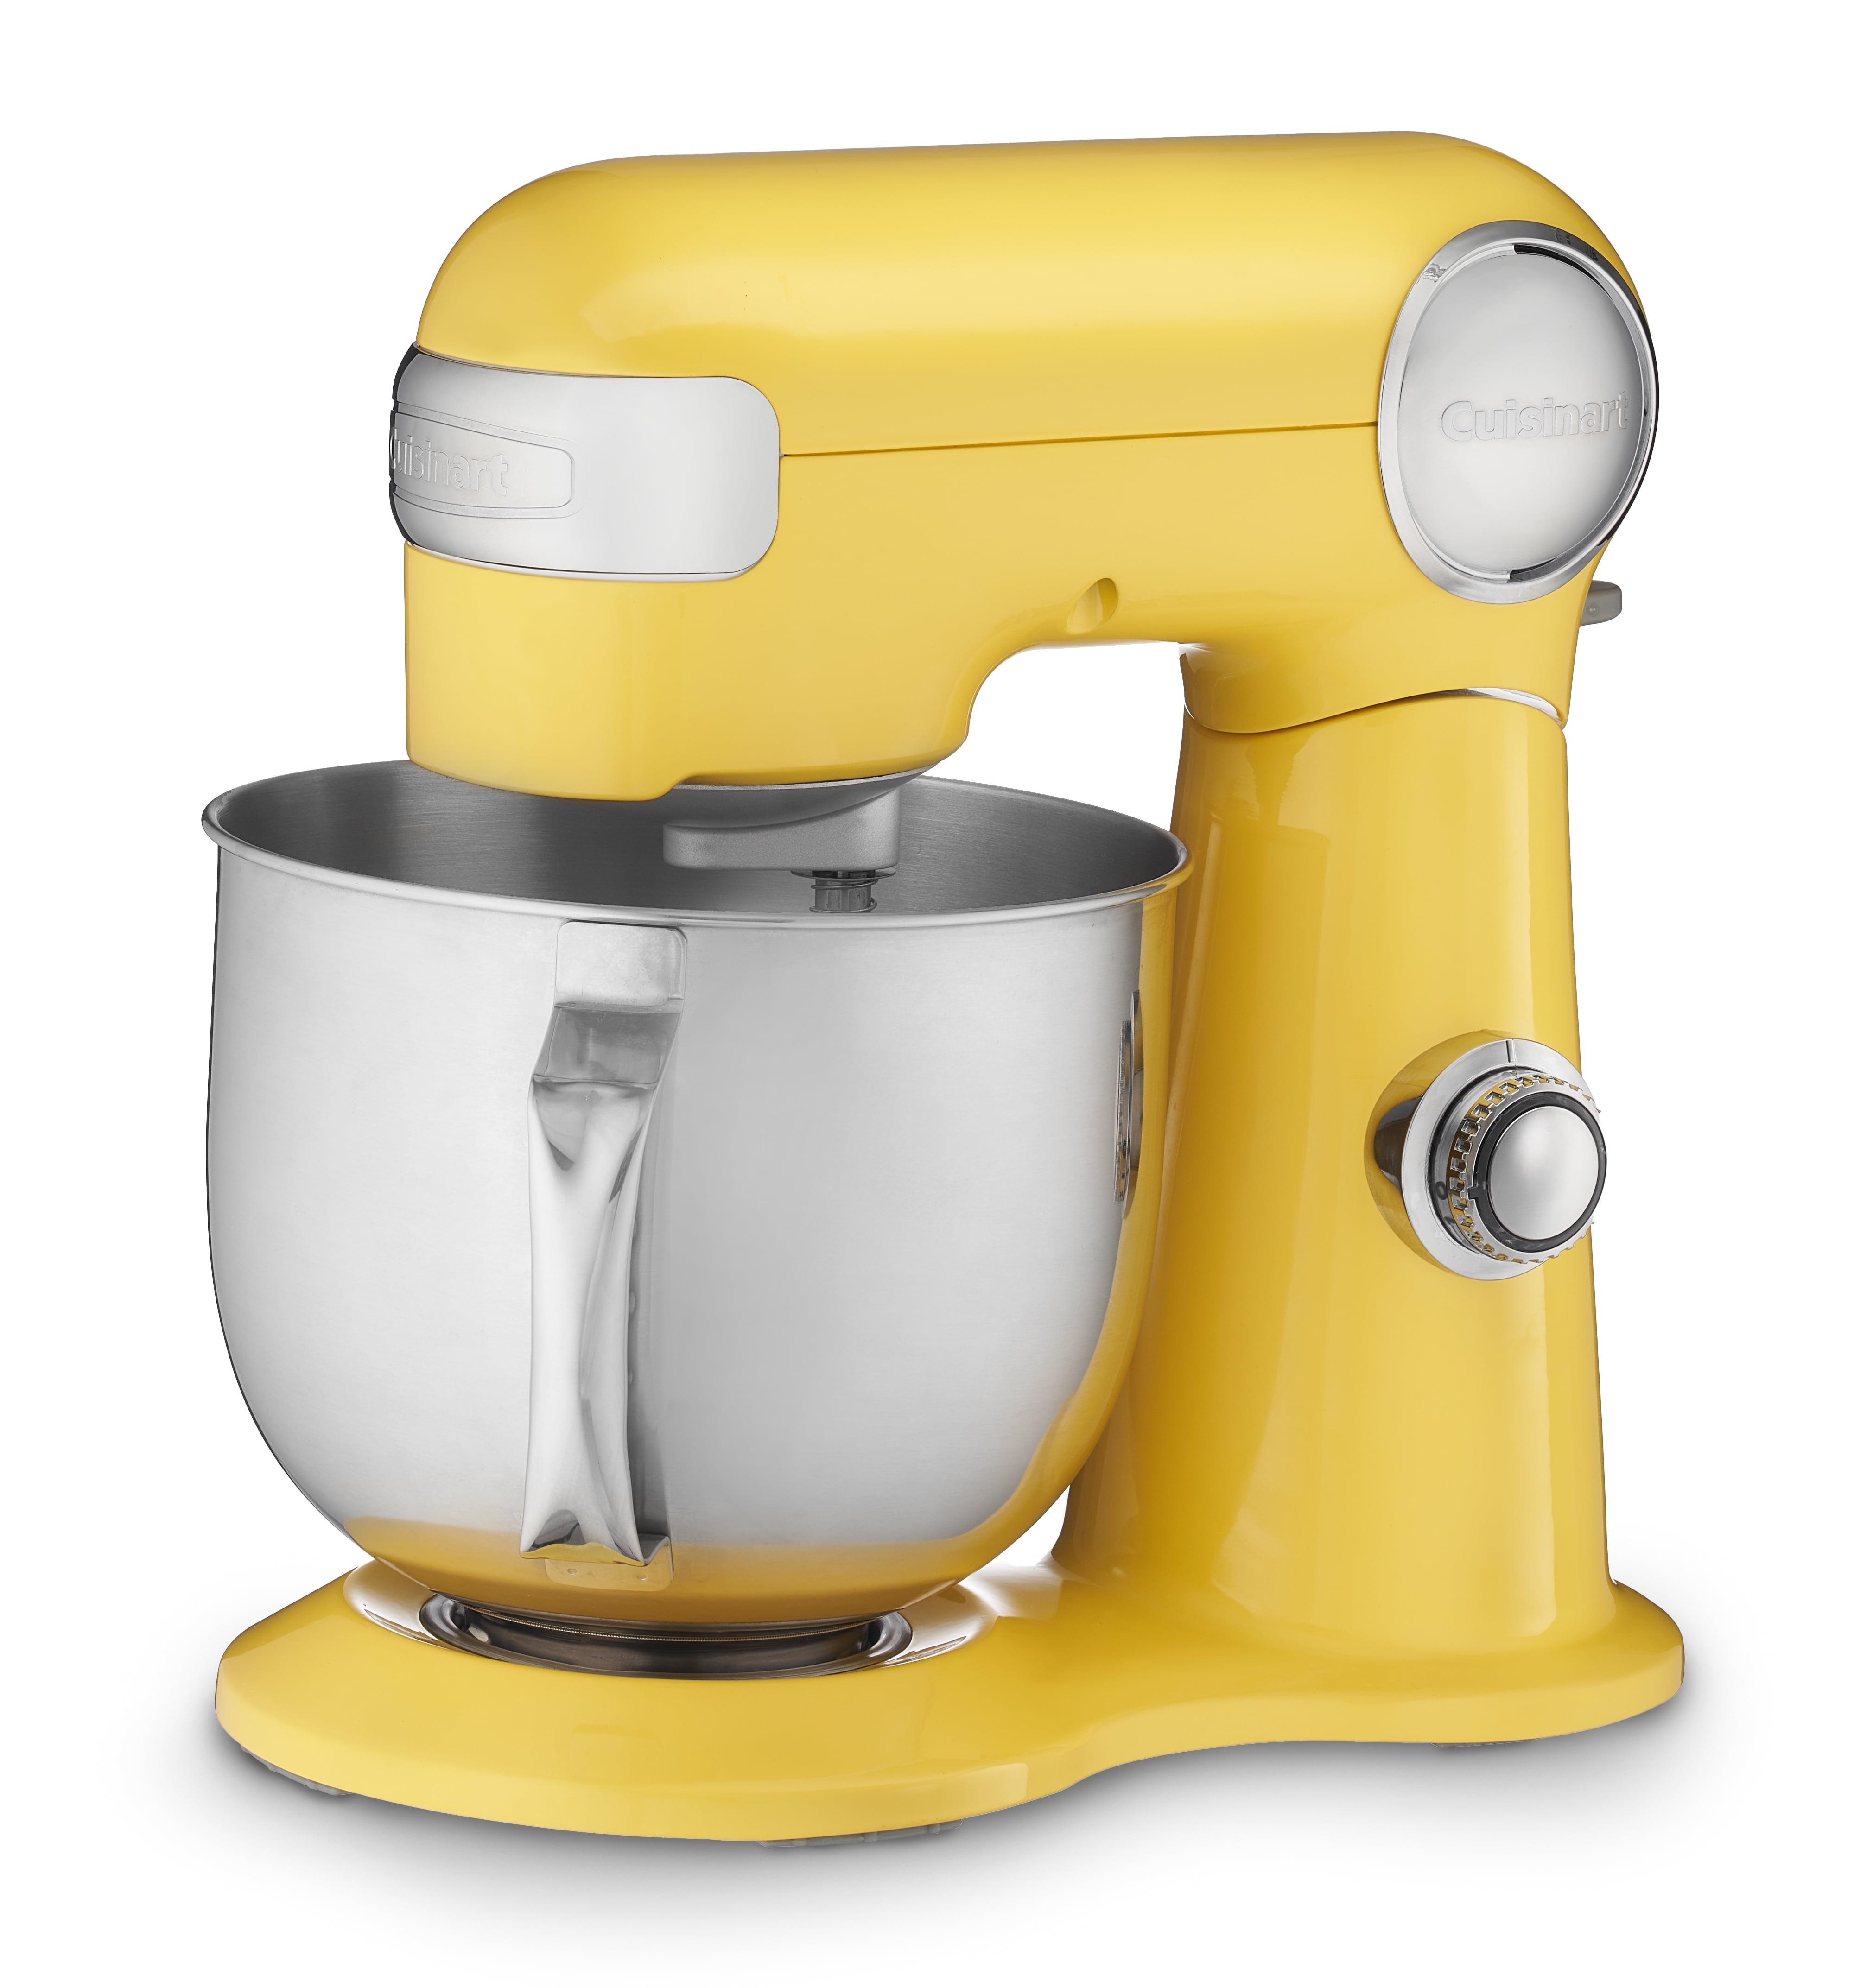 Cuisinart SM-50Y Stand Mixer, Yellow